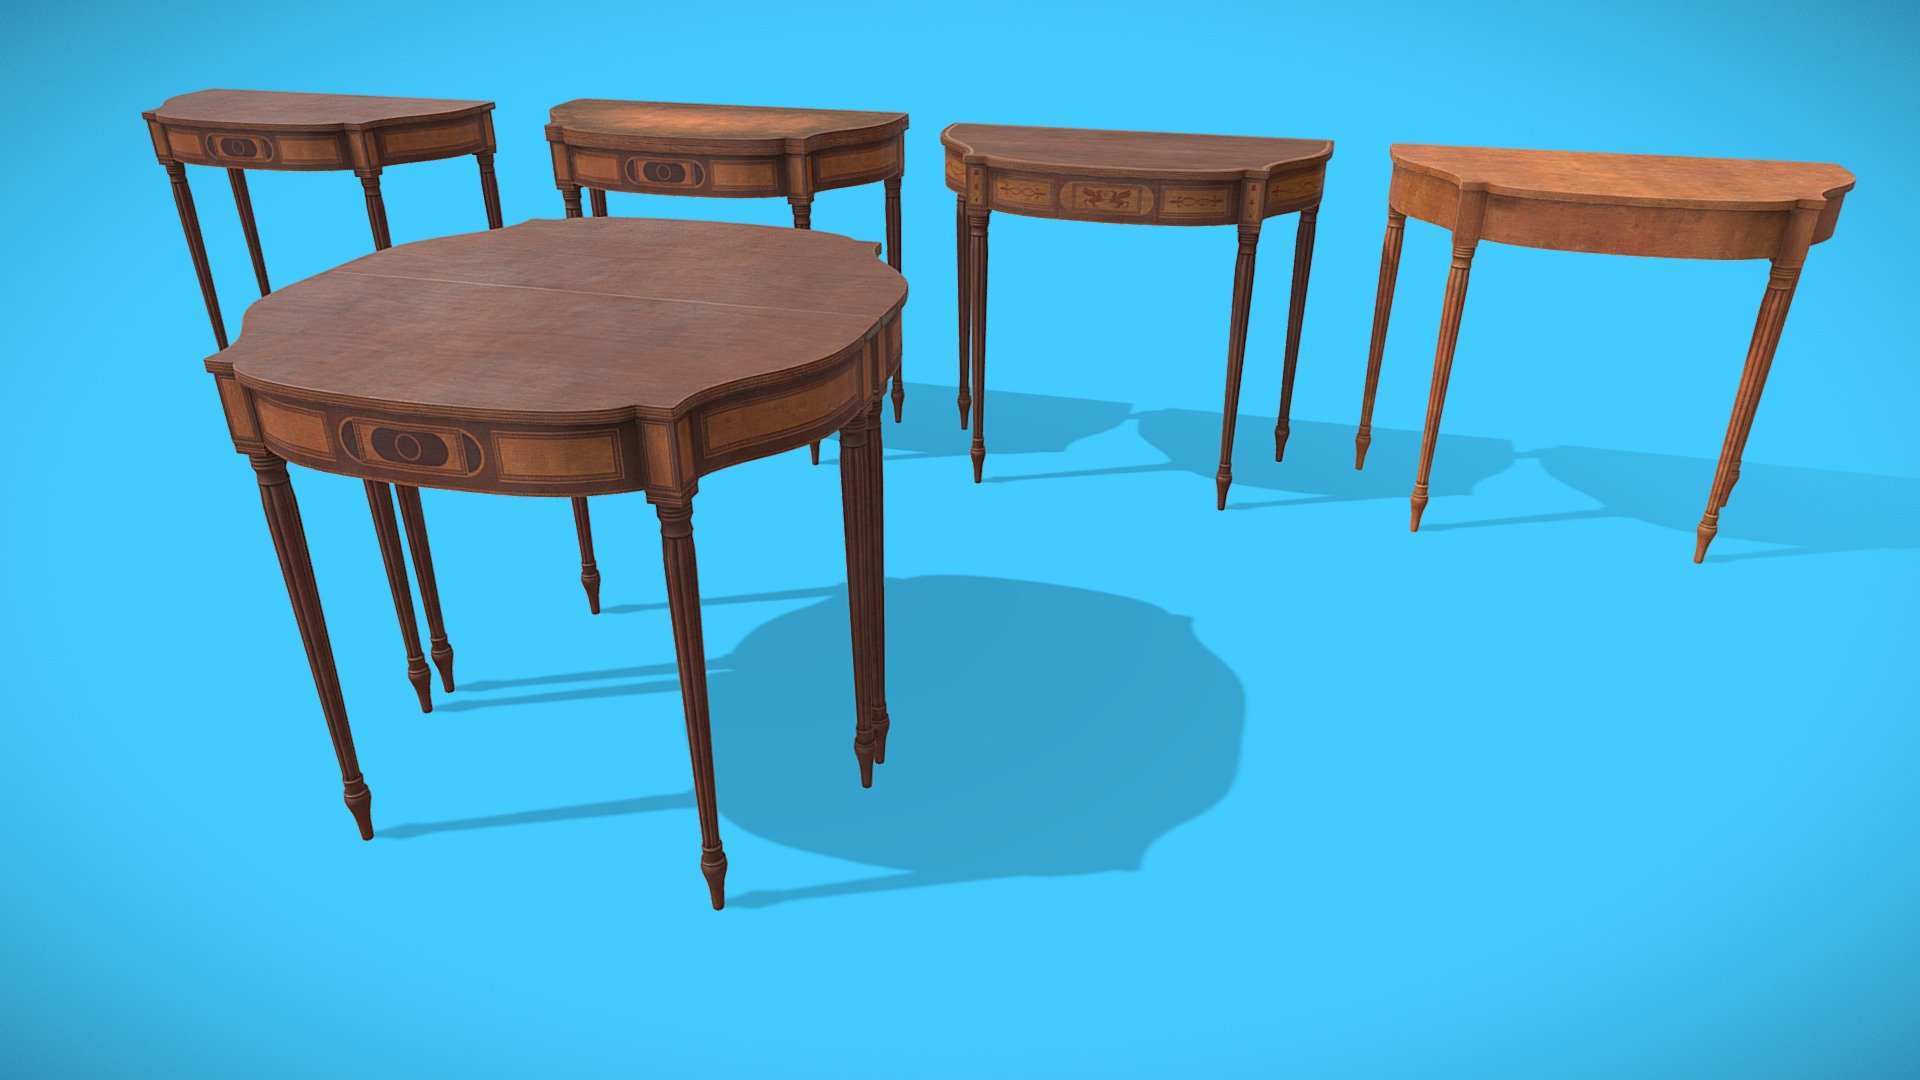 1800s wooden Card Playing Tables in a variety of configurations and three texture options. Useful in a wide variety of settings 3d model